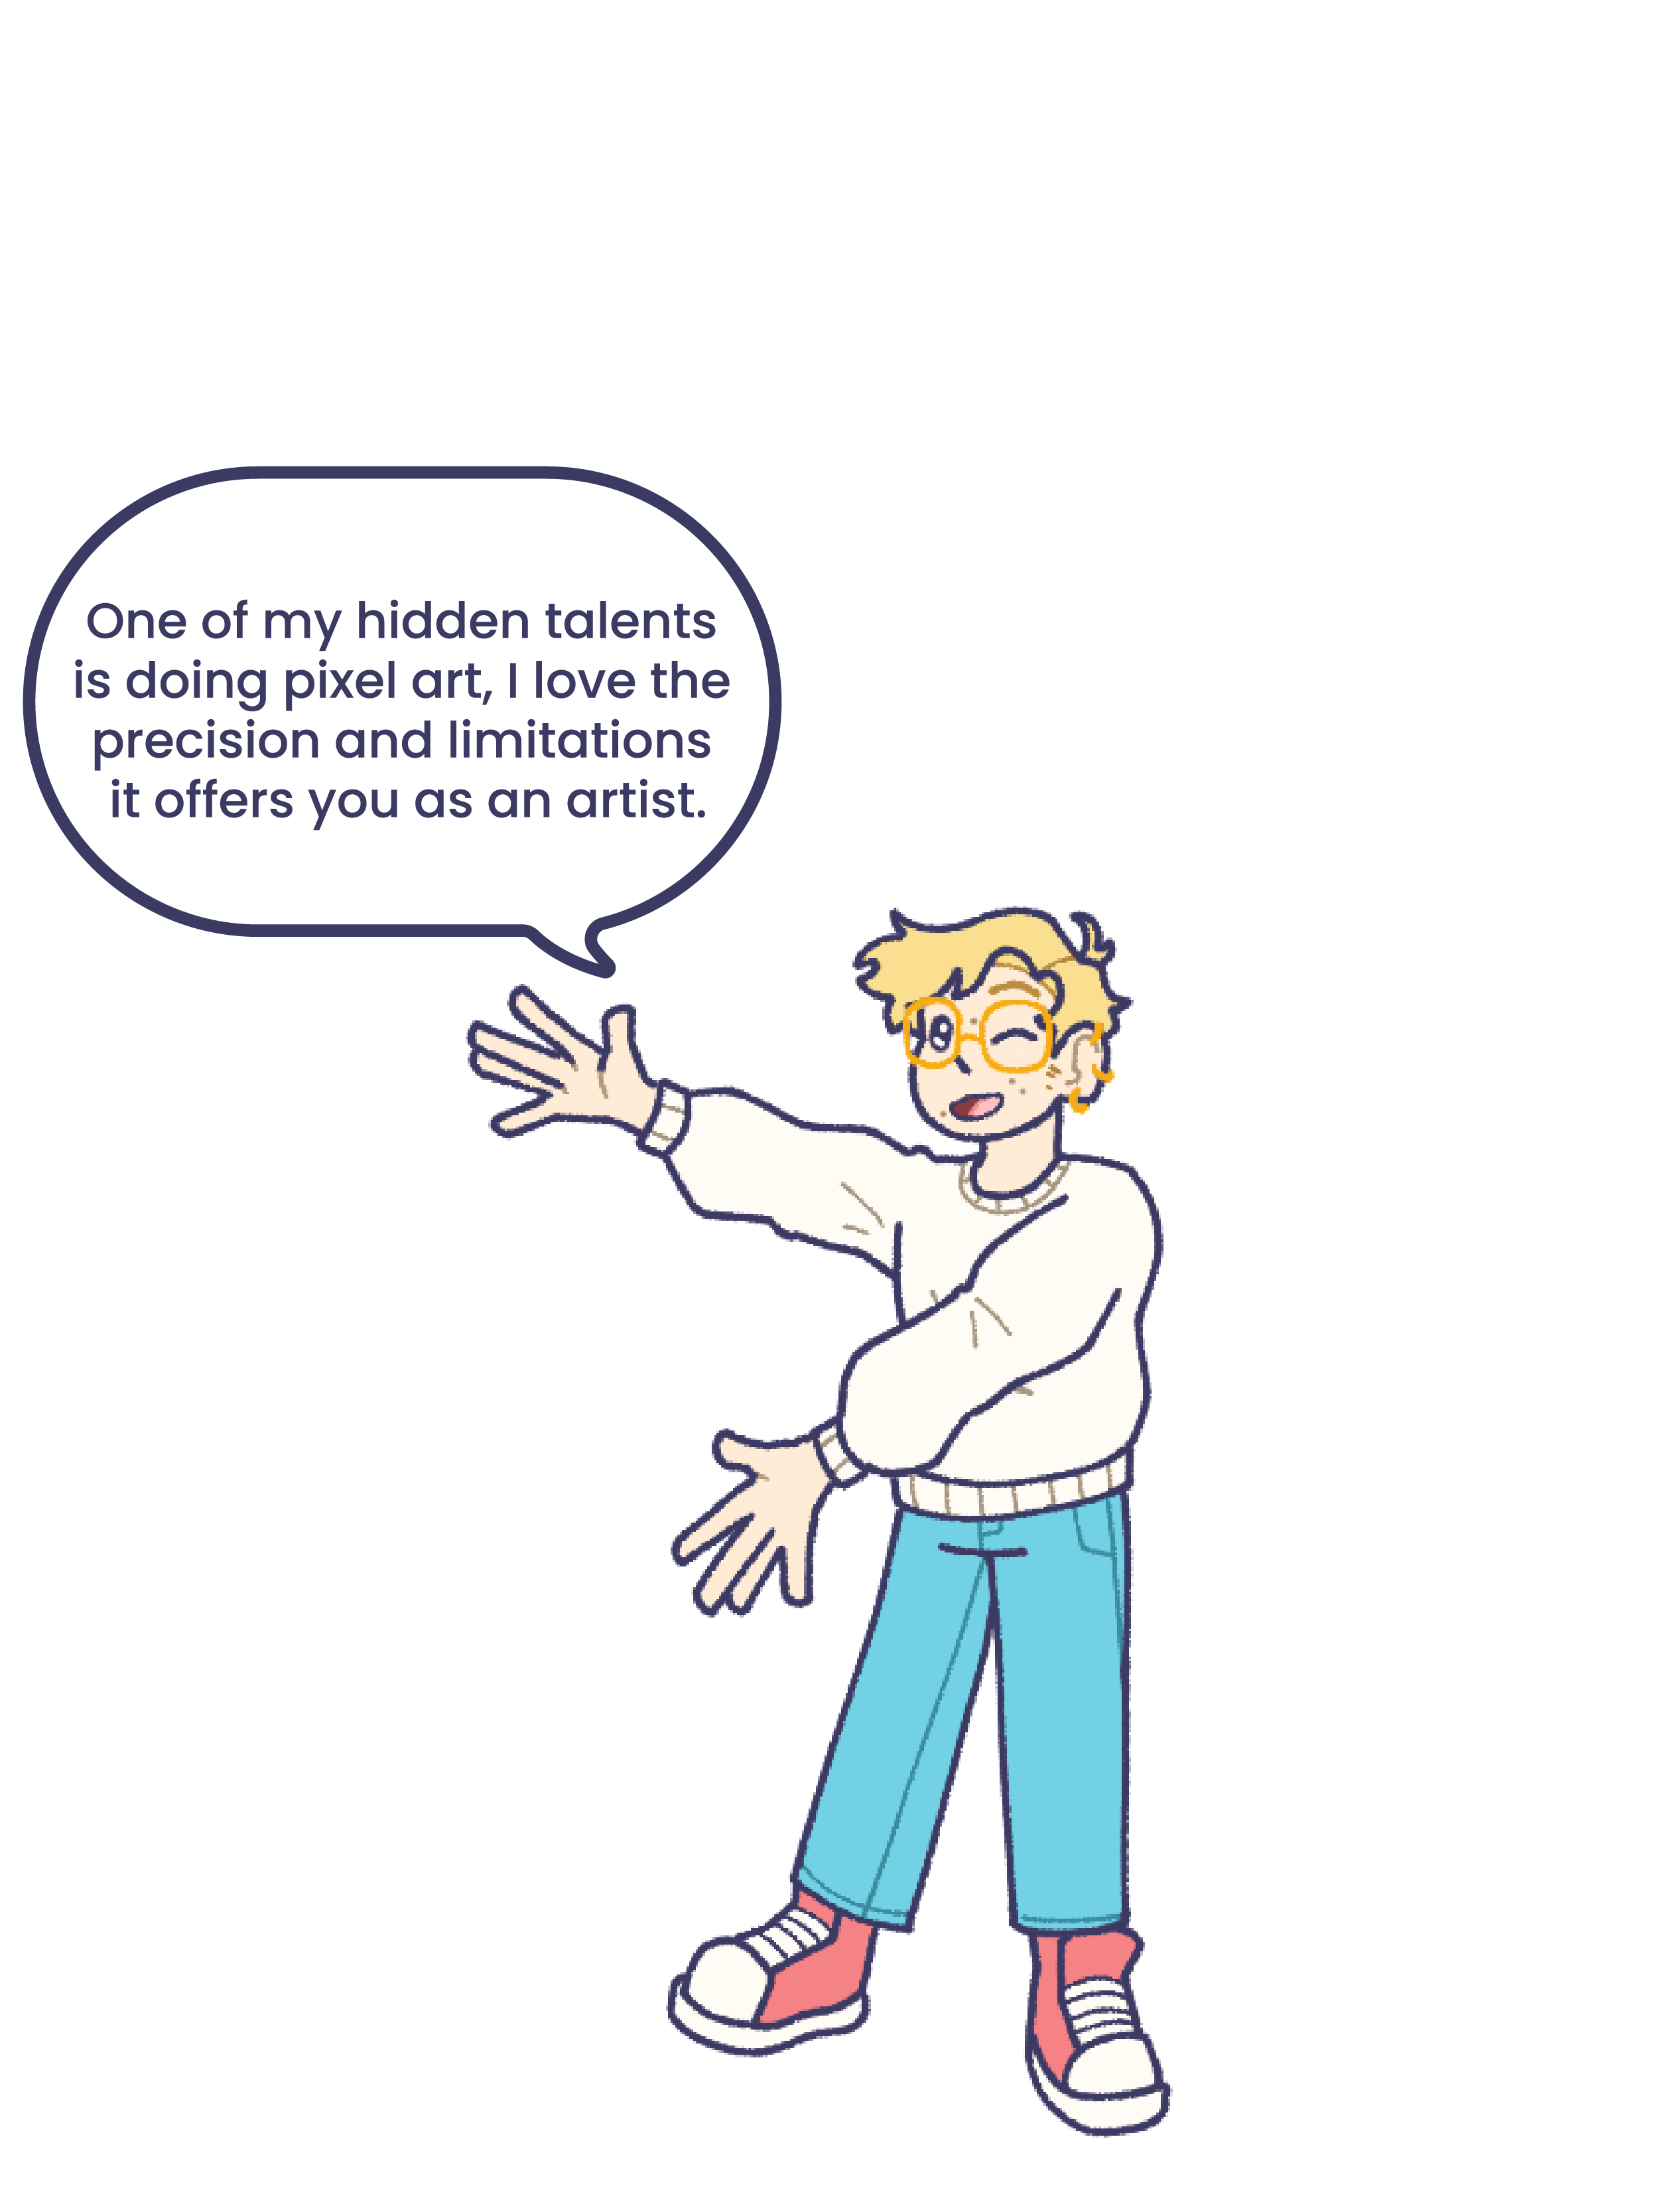 An illustration of me, with a text bubble that reads: One of my hidden talents is doing pixel art, I love the precision and limitations it offers you as an artist.